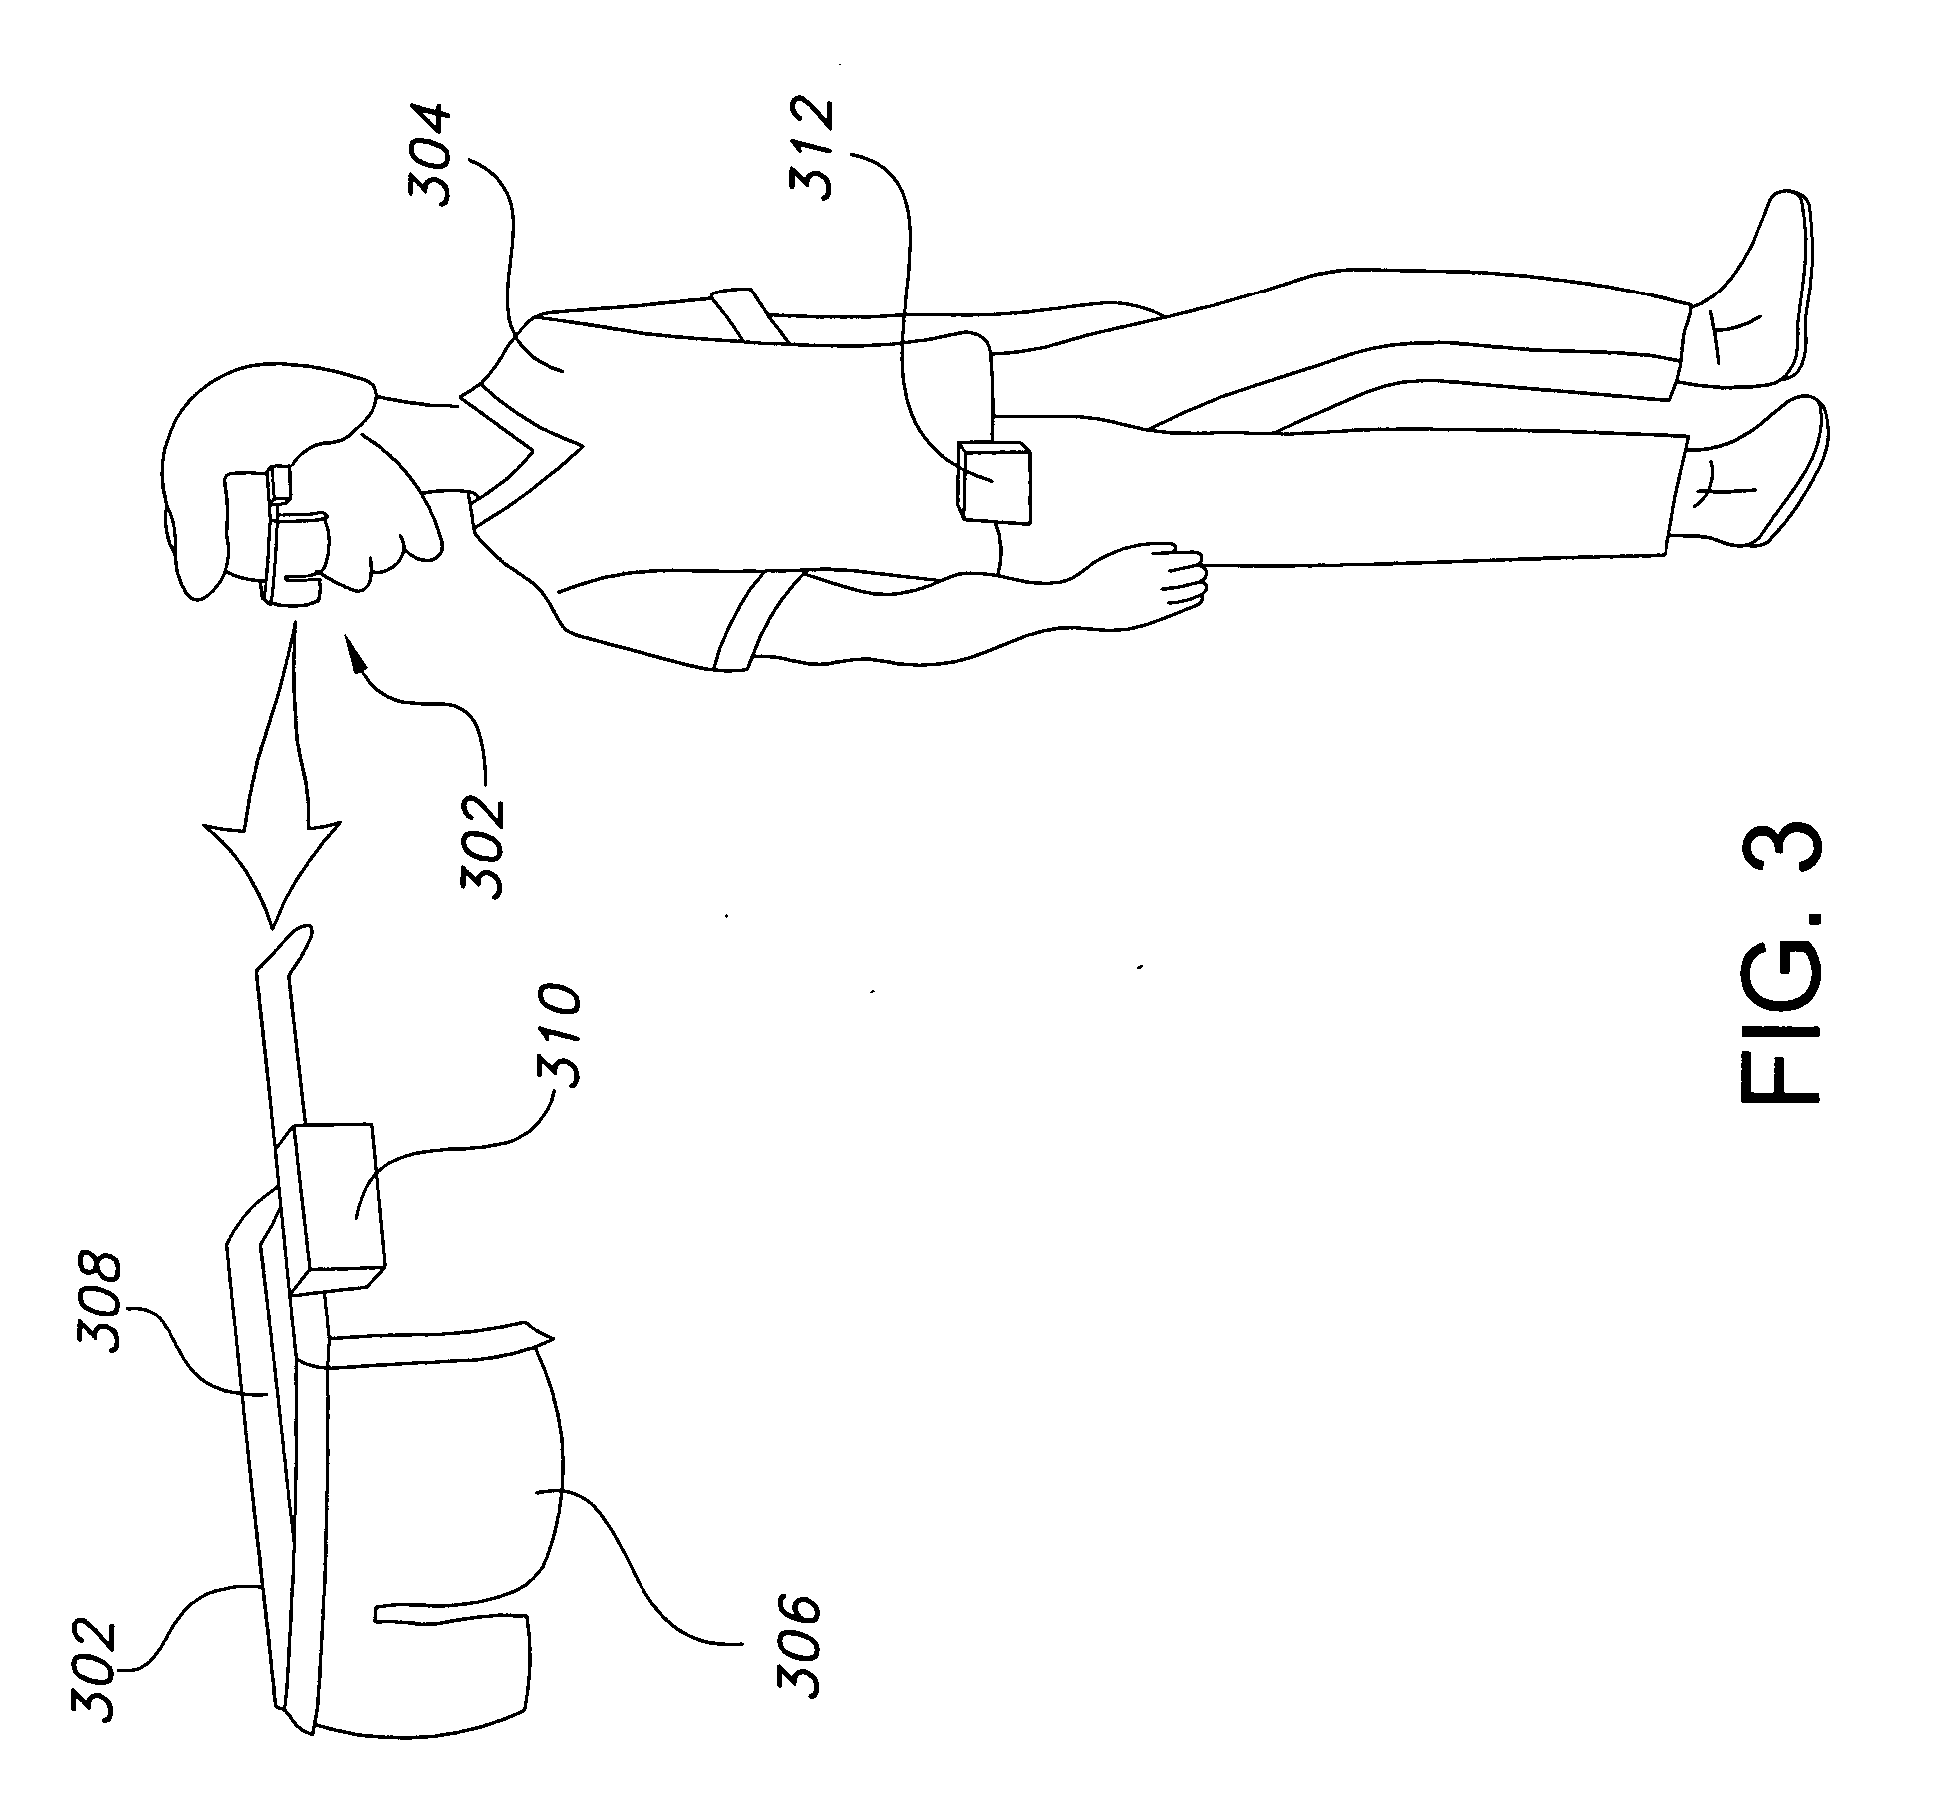 Item tracking and processing systems and methods